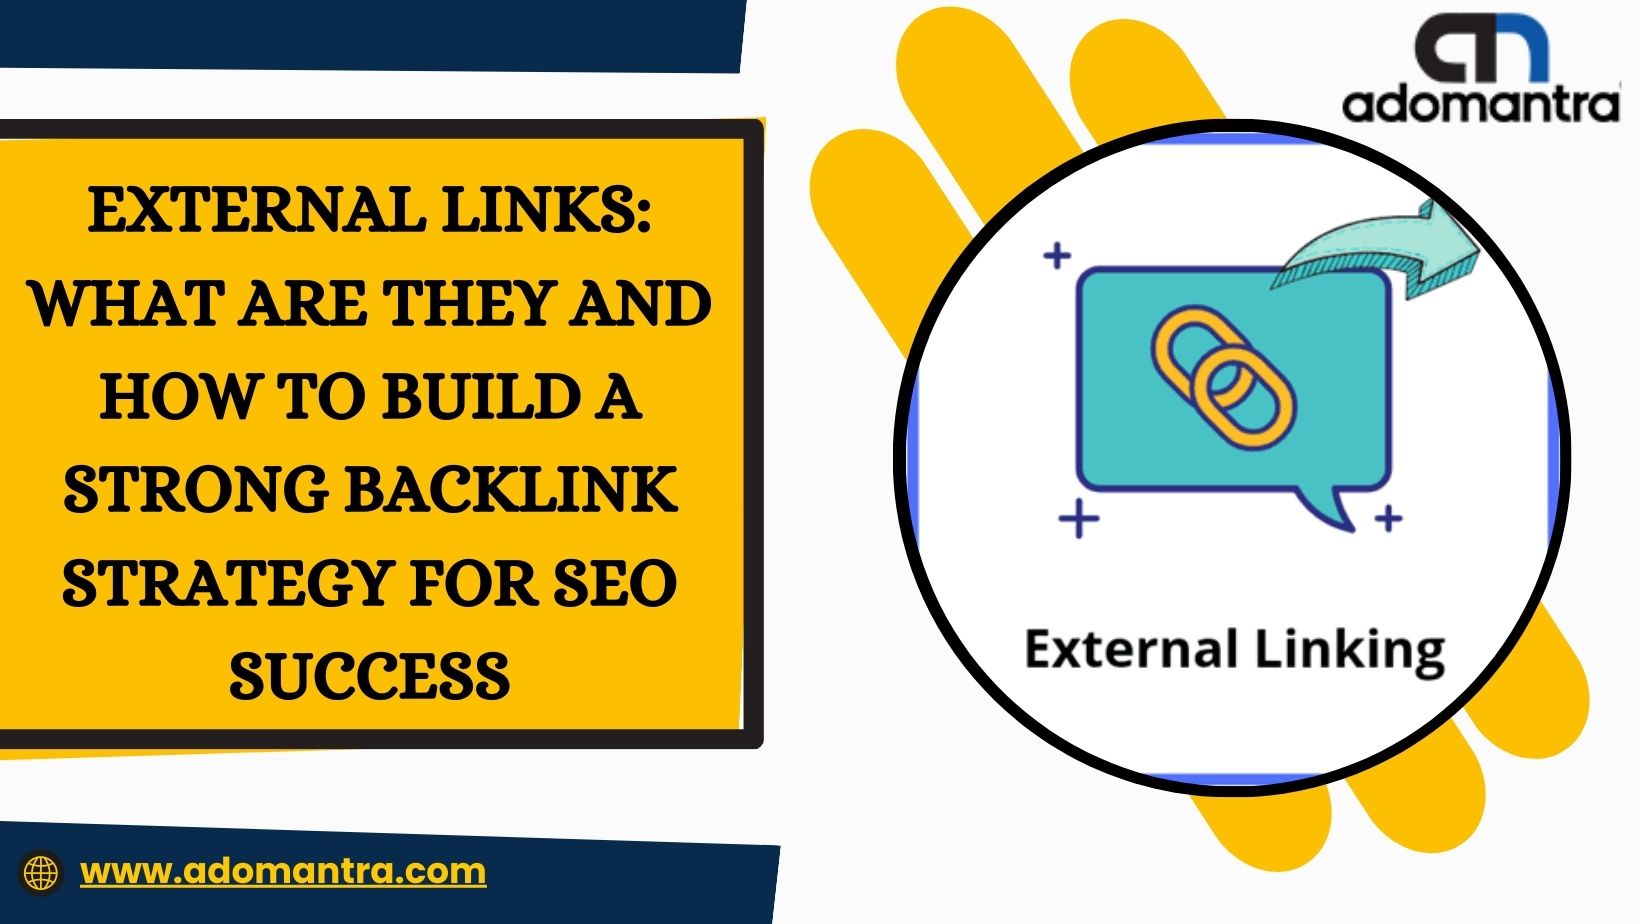 External Links: What Are They and How to Build a Strong Backlink Strategy for SEO Success